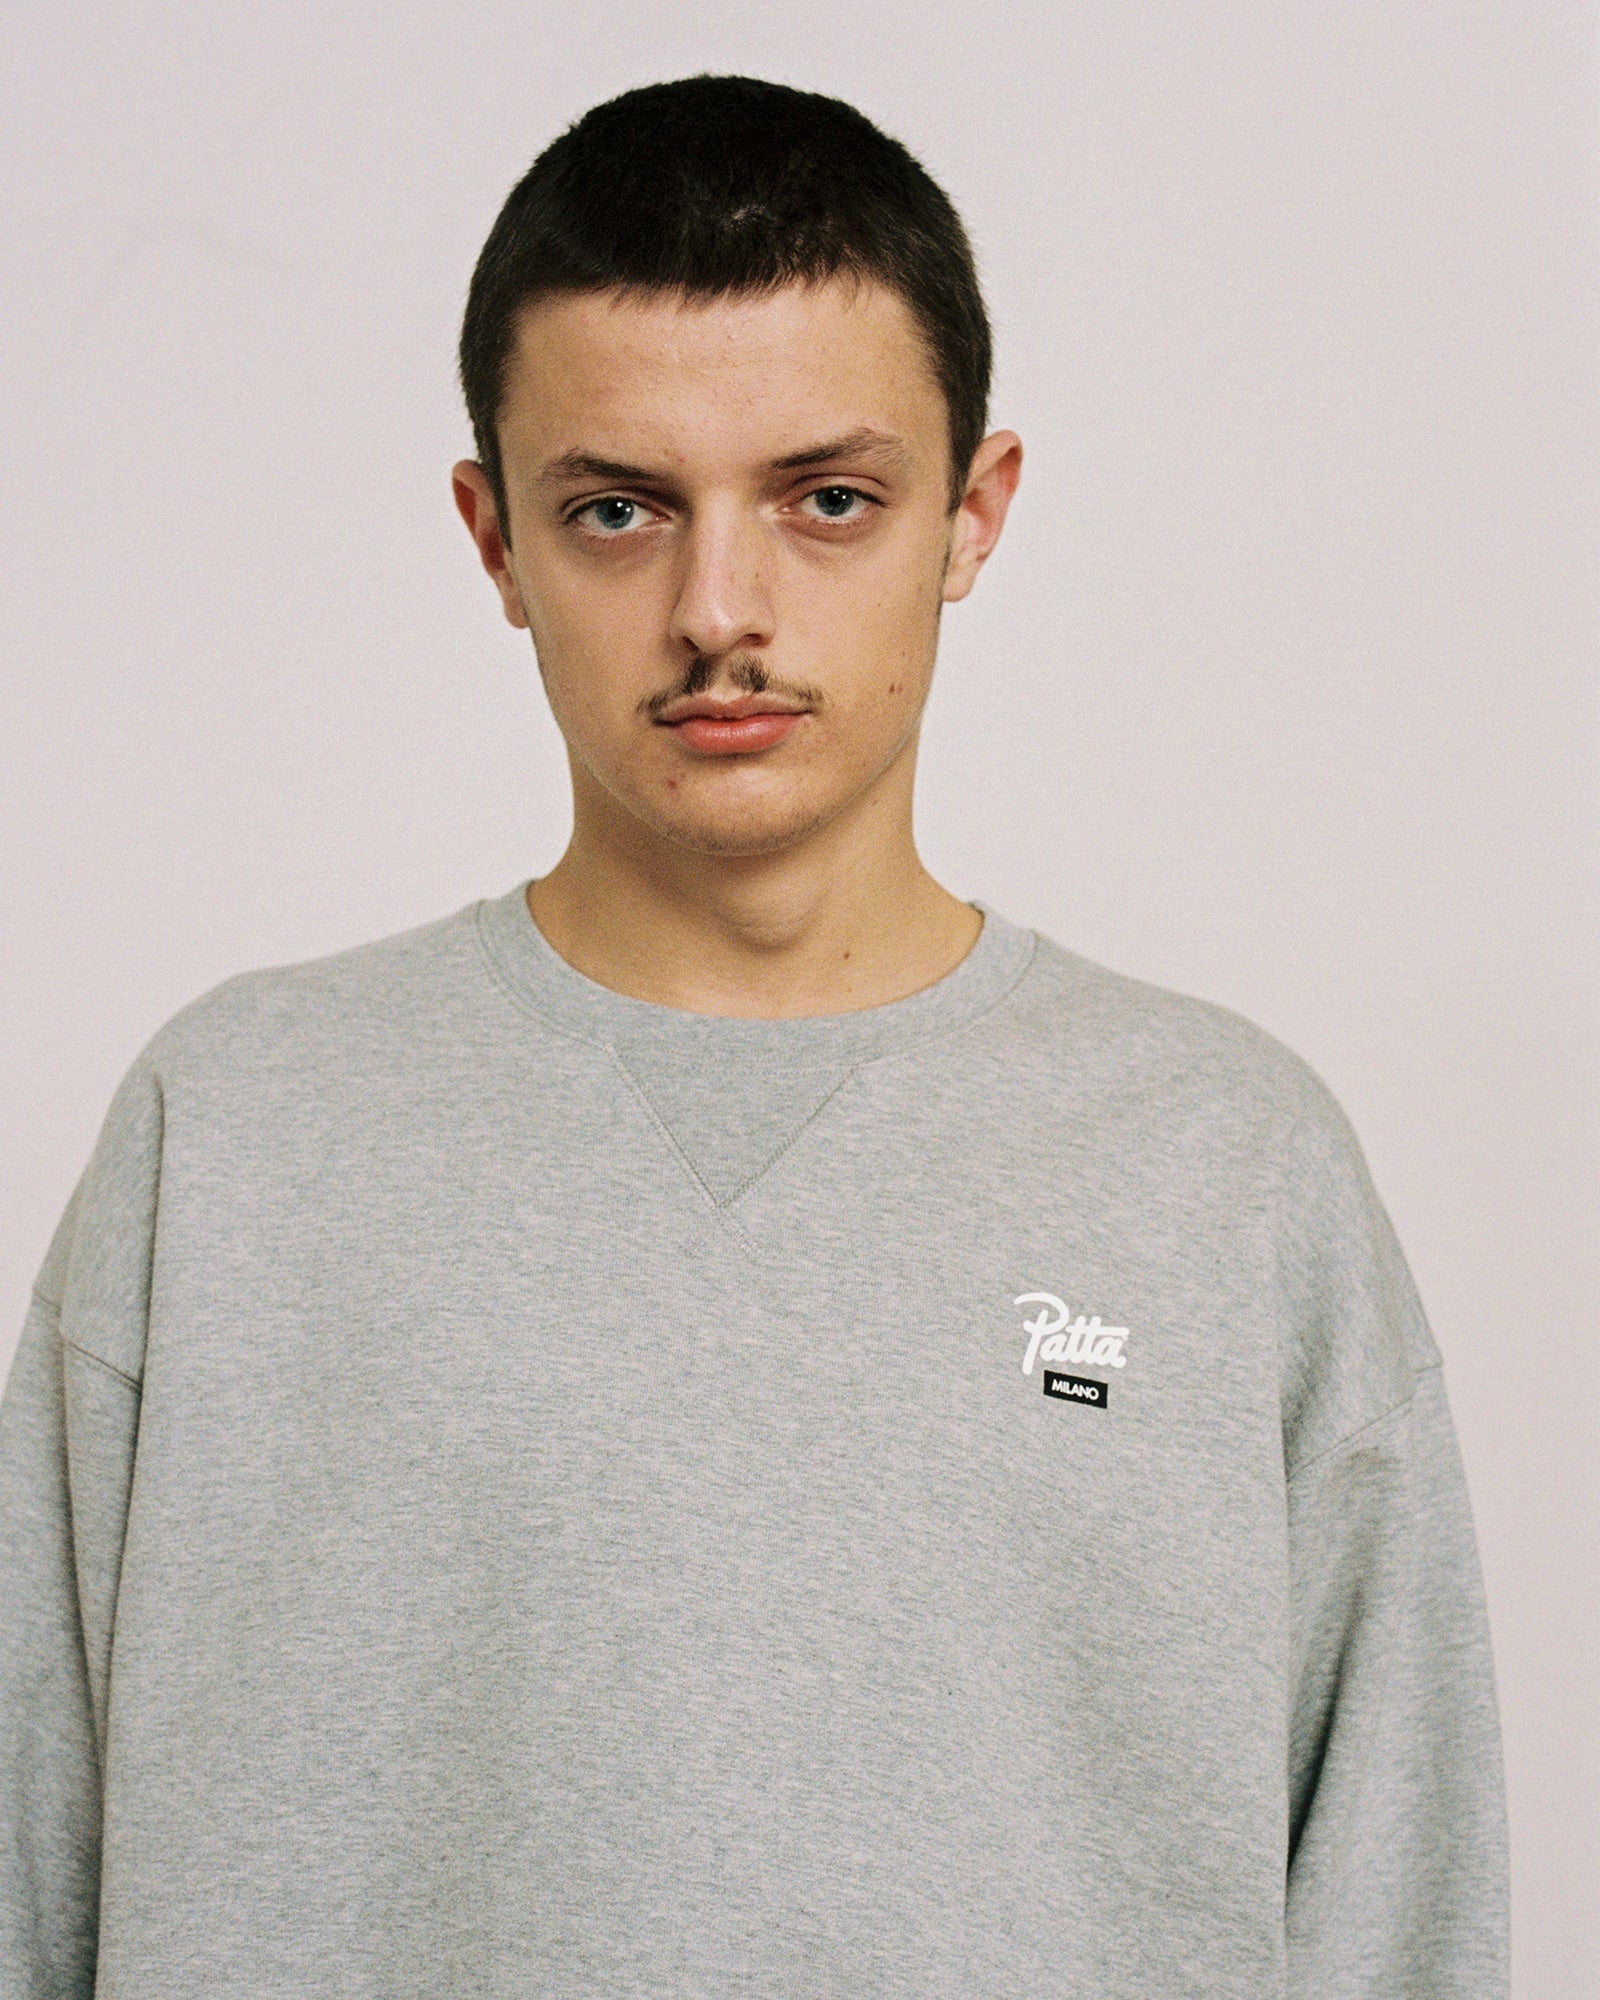 CITY-SPECIFIC TEES AND SWEATSHIRTS : AMSTERDAM, LONDON AND MILAN – Patta